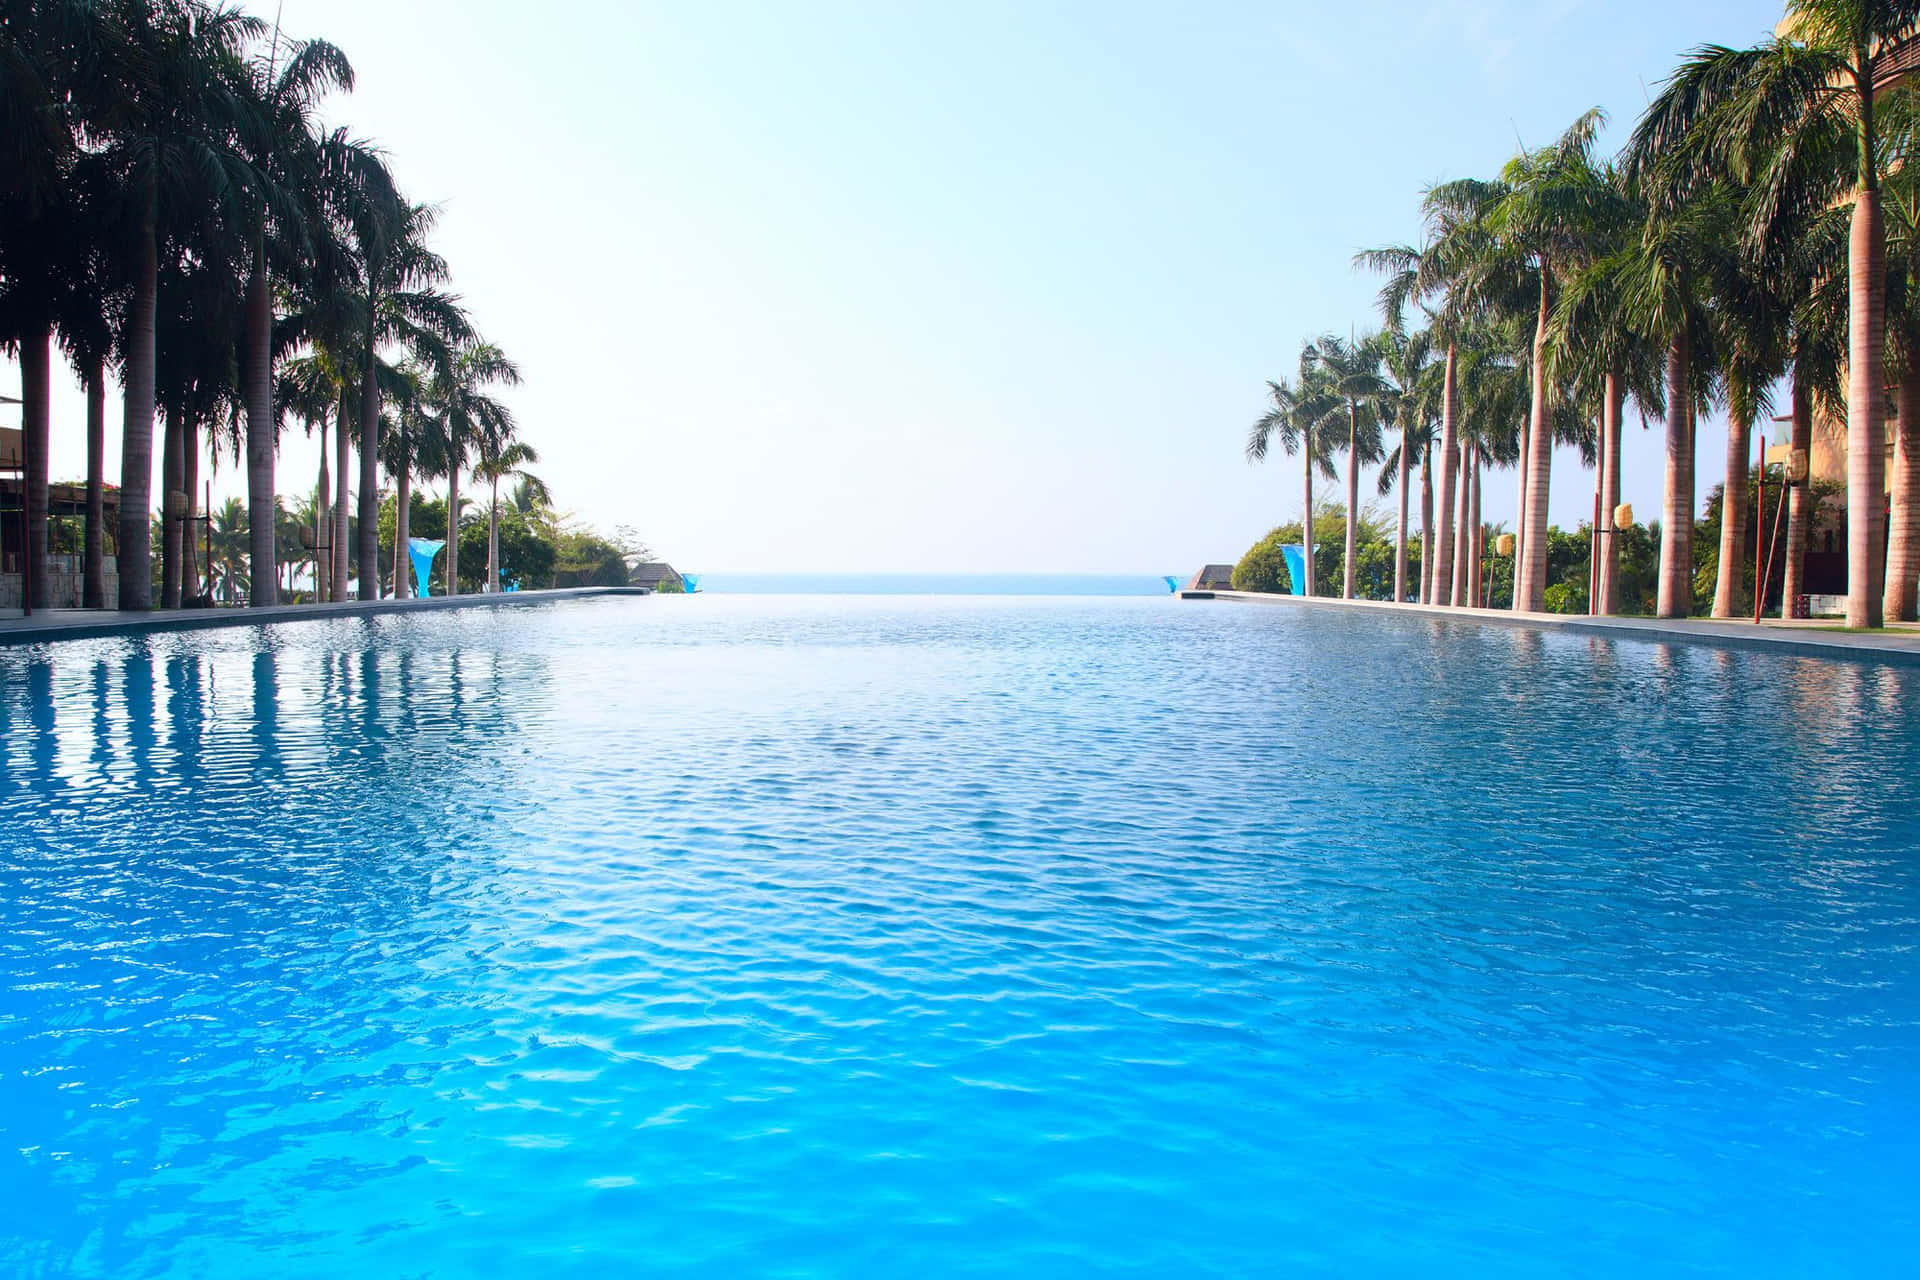 A Large Pool With Palm Trees And Ocean